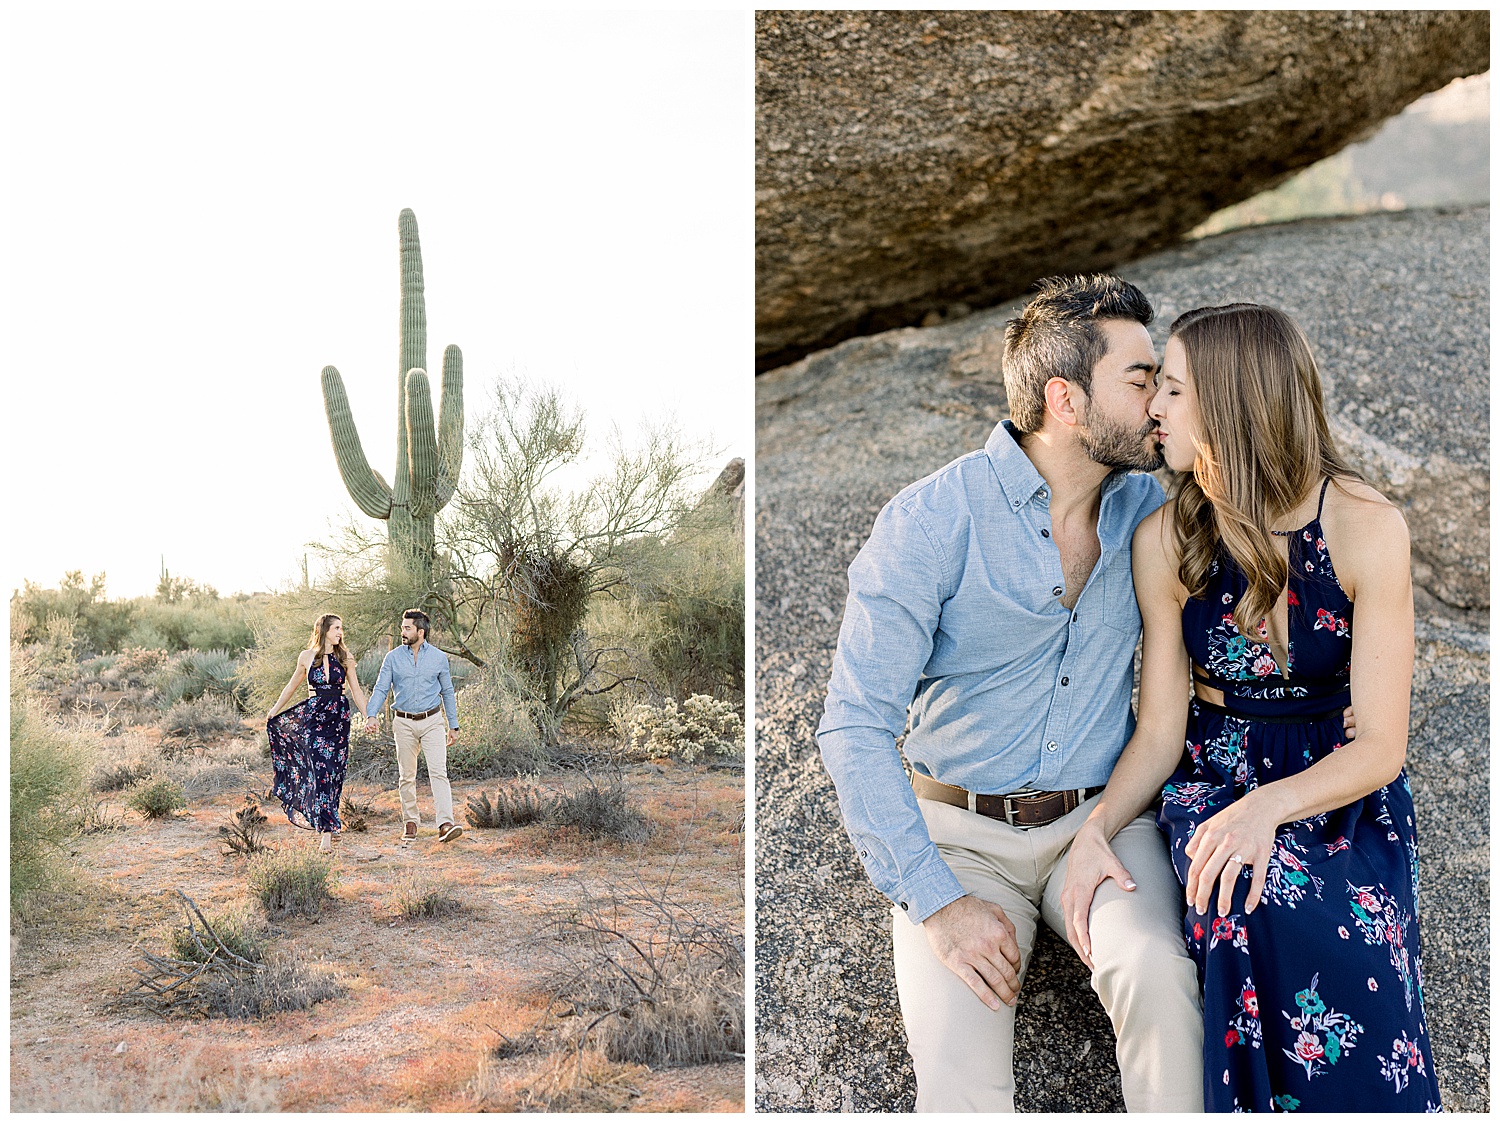 Engagement Session in North Scottsdale Desert with boulders and saguaros